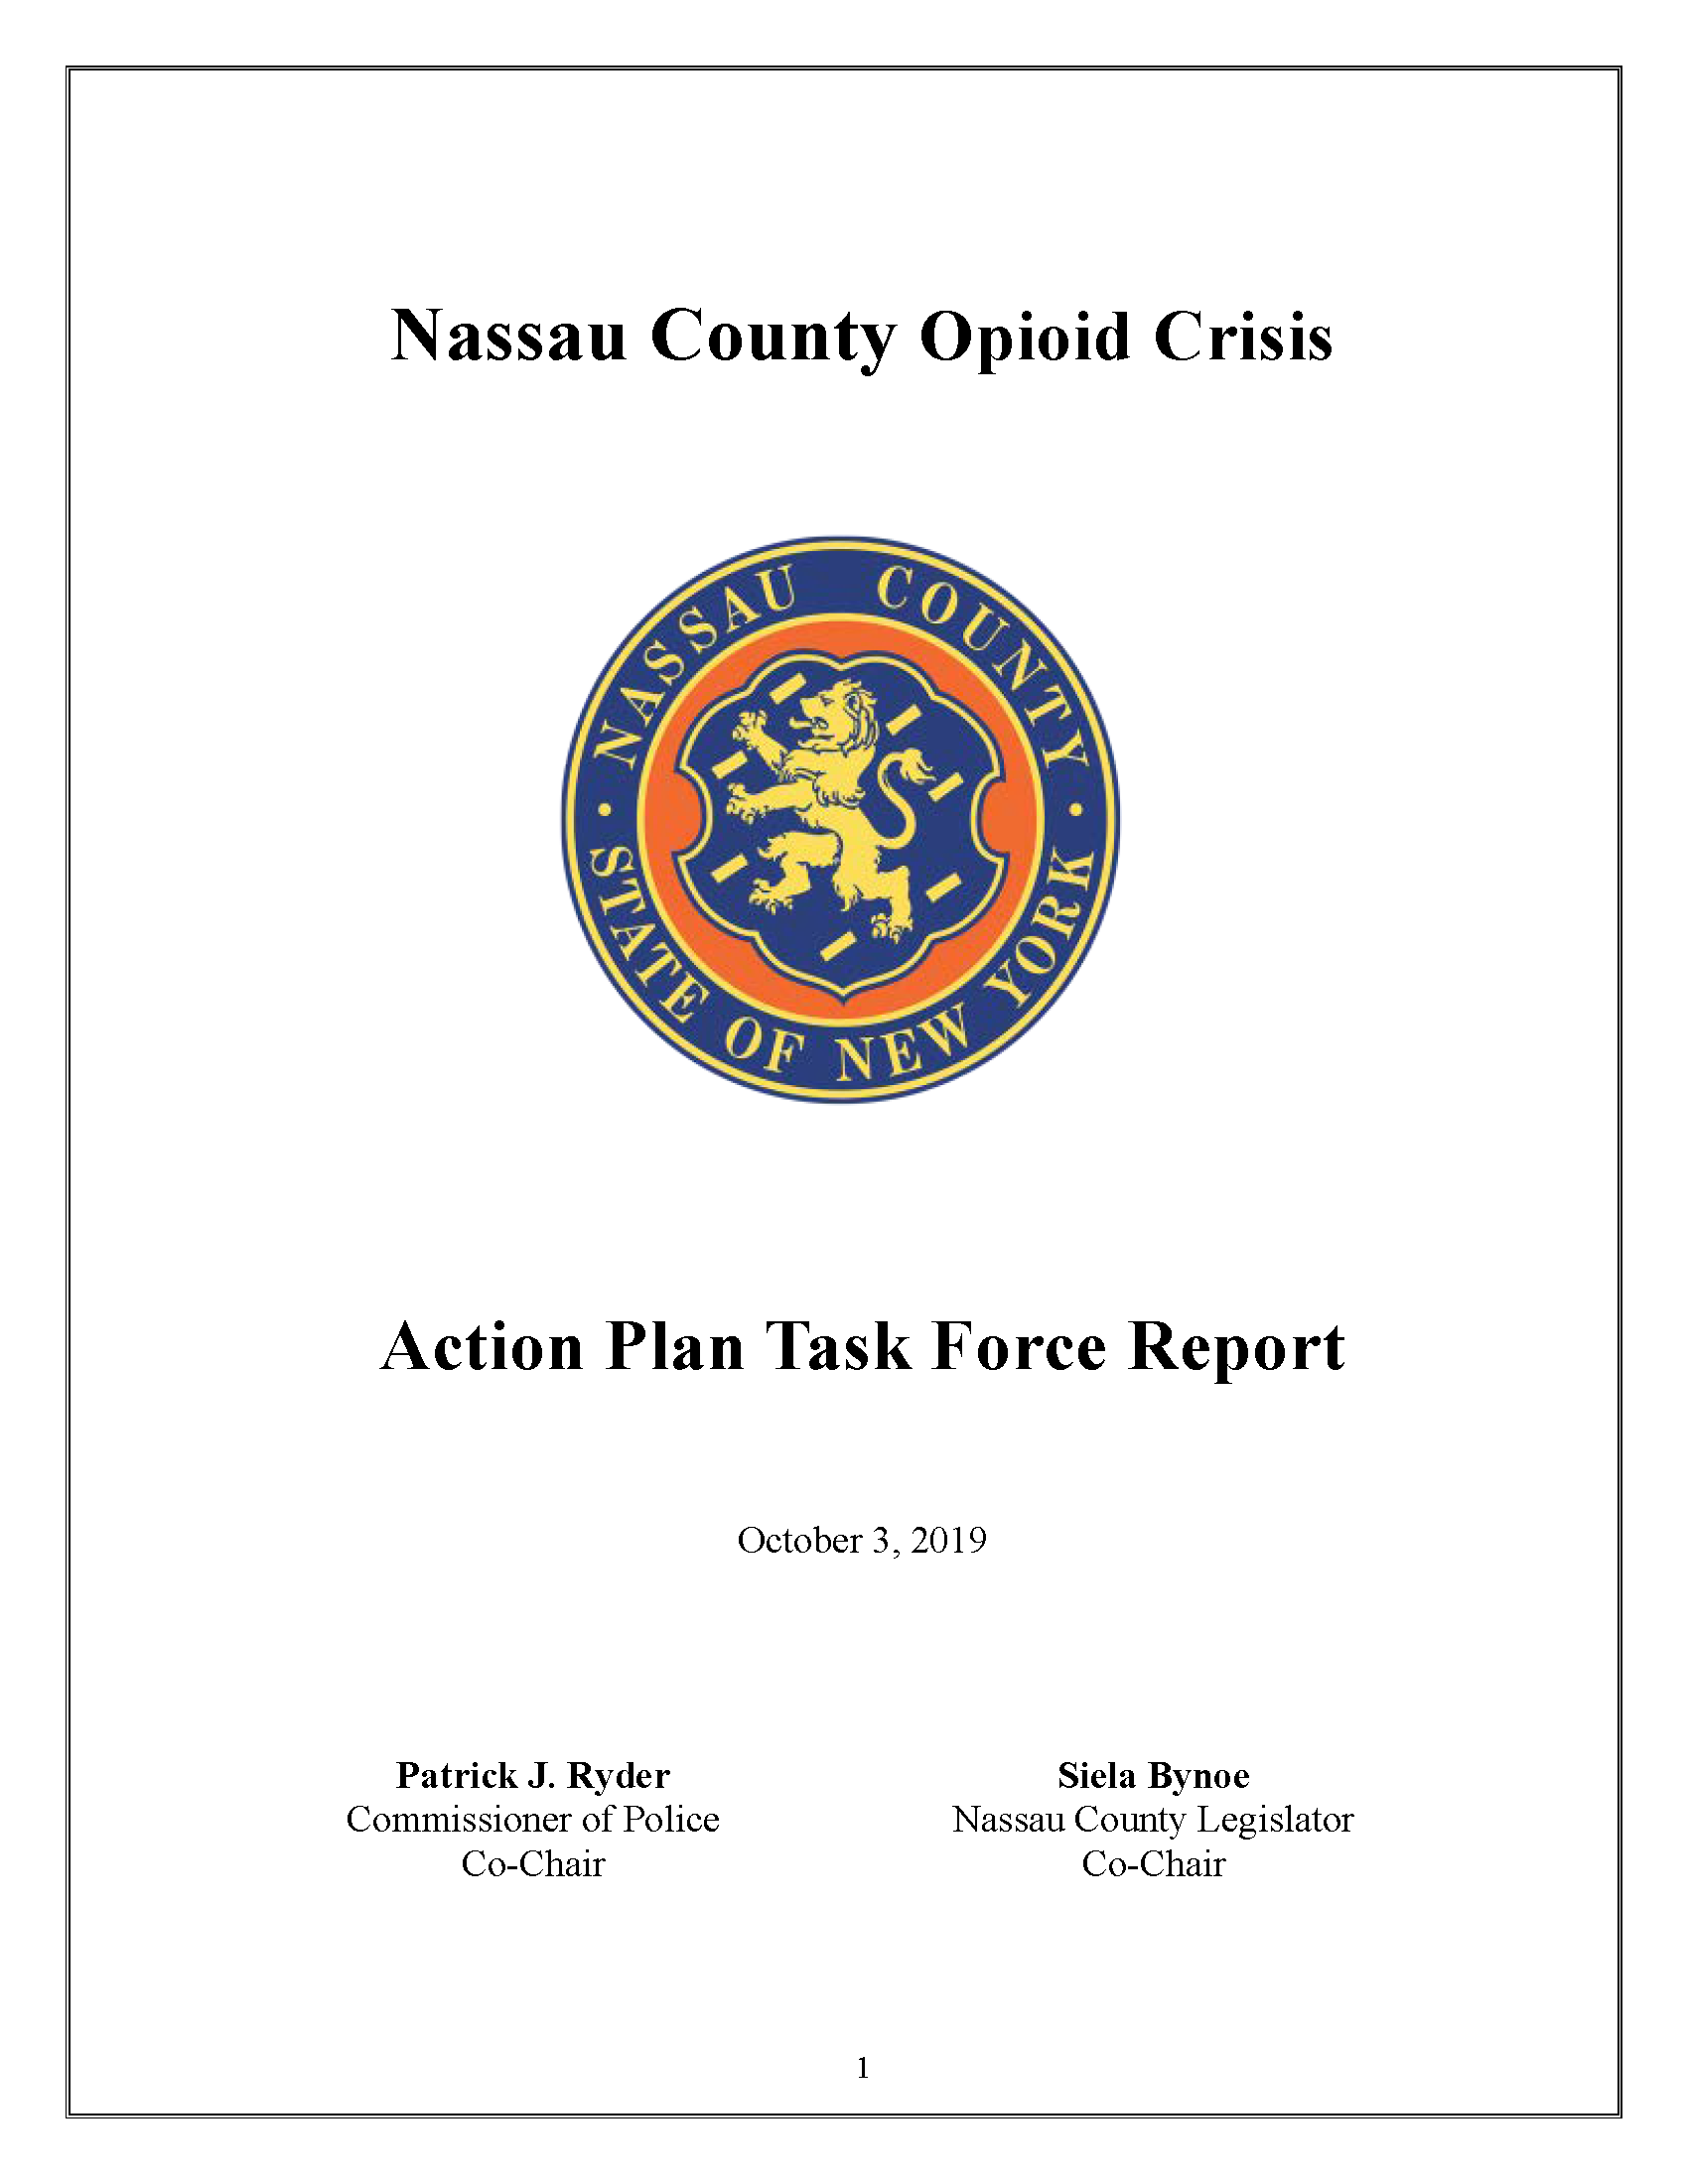 Nassau County Opioid Crisis Action Plan Task Force Report - FINAL_Page_01 Opens in new window